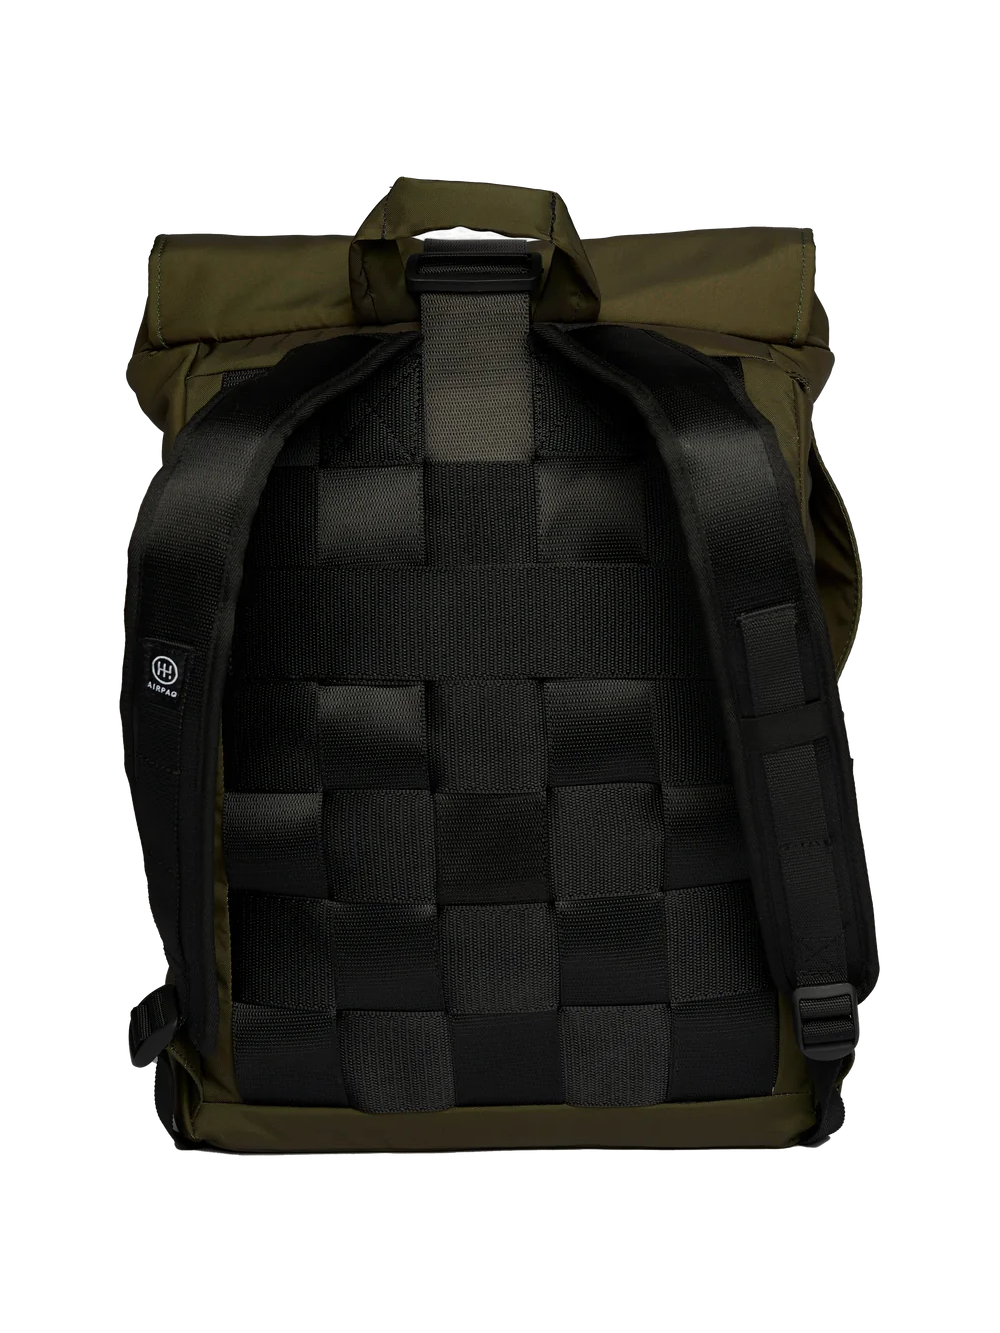 Airpaq Backpack Rolltop - green Printed 